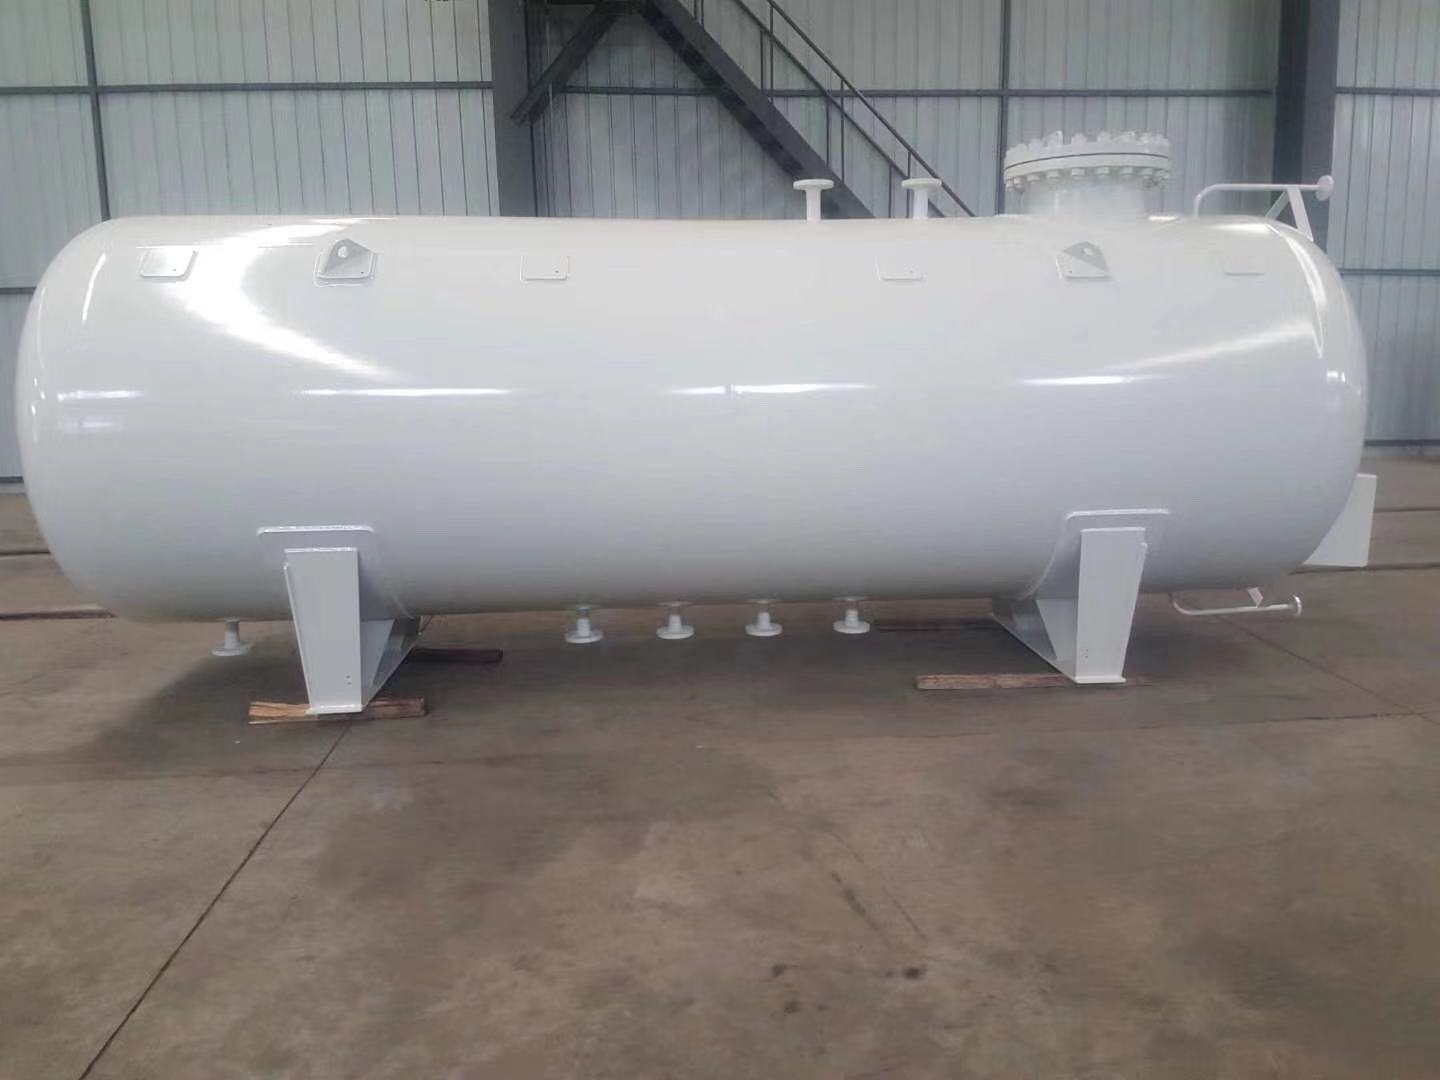 Advantages of LPG Tank Container